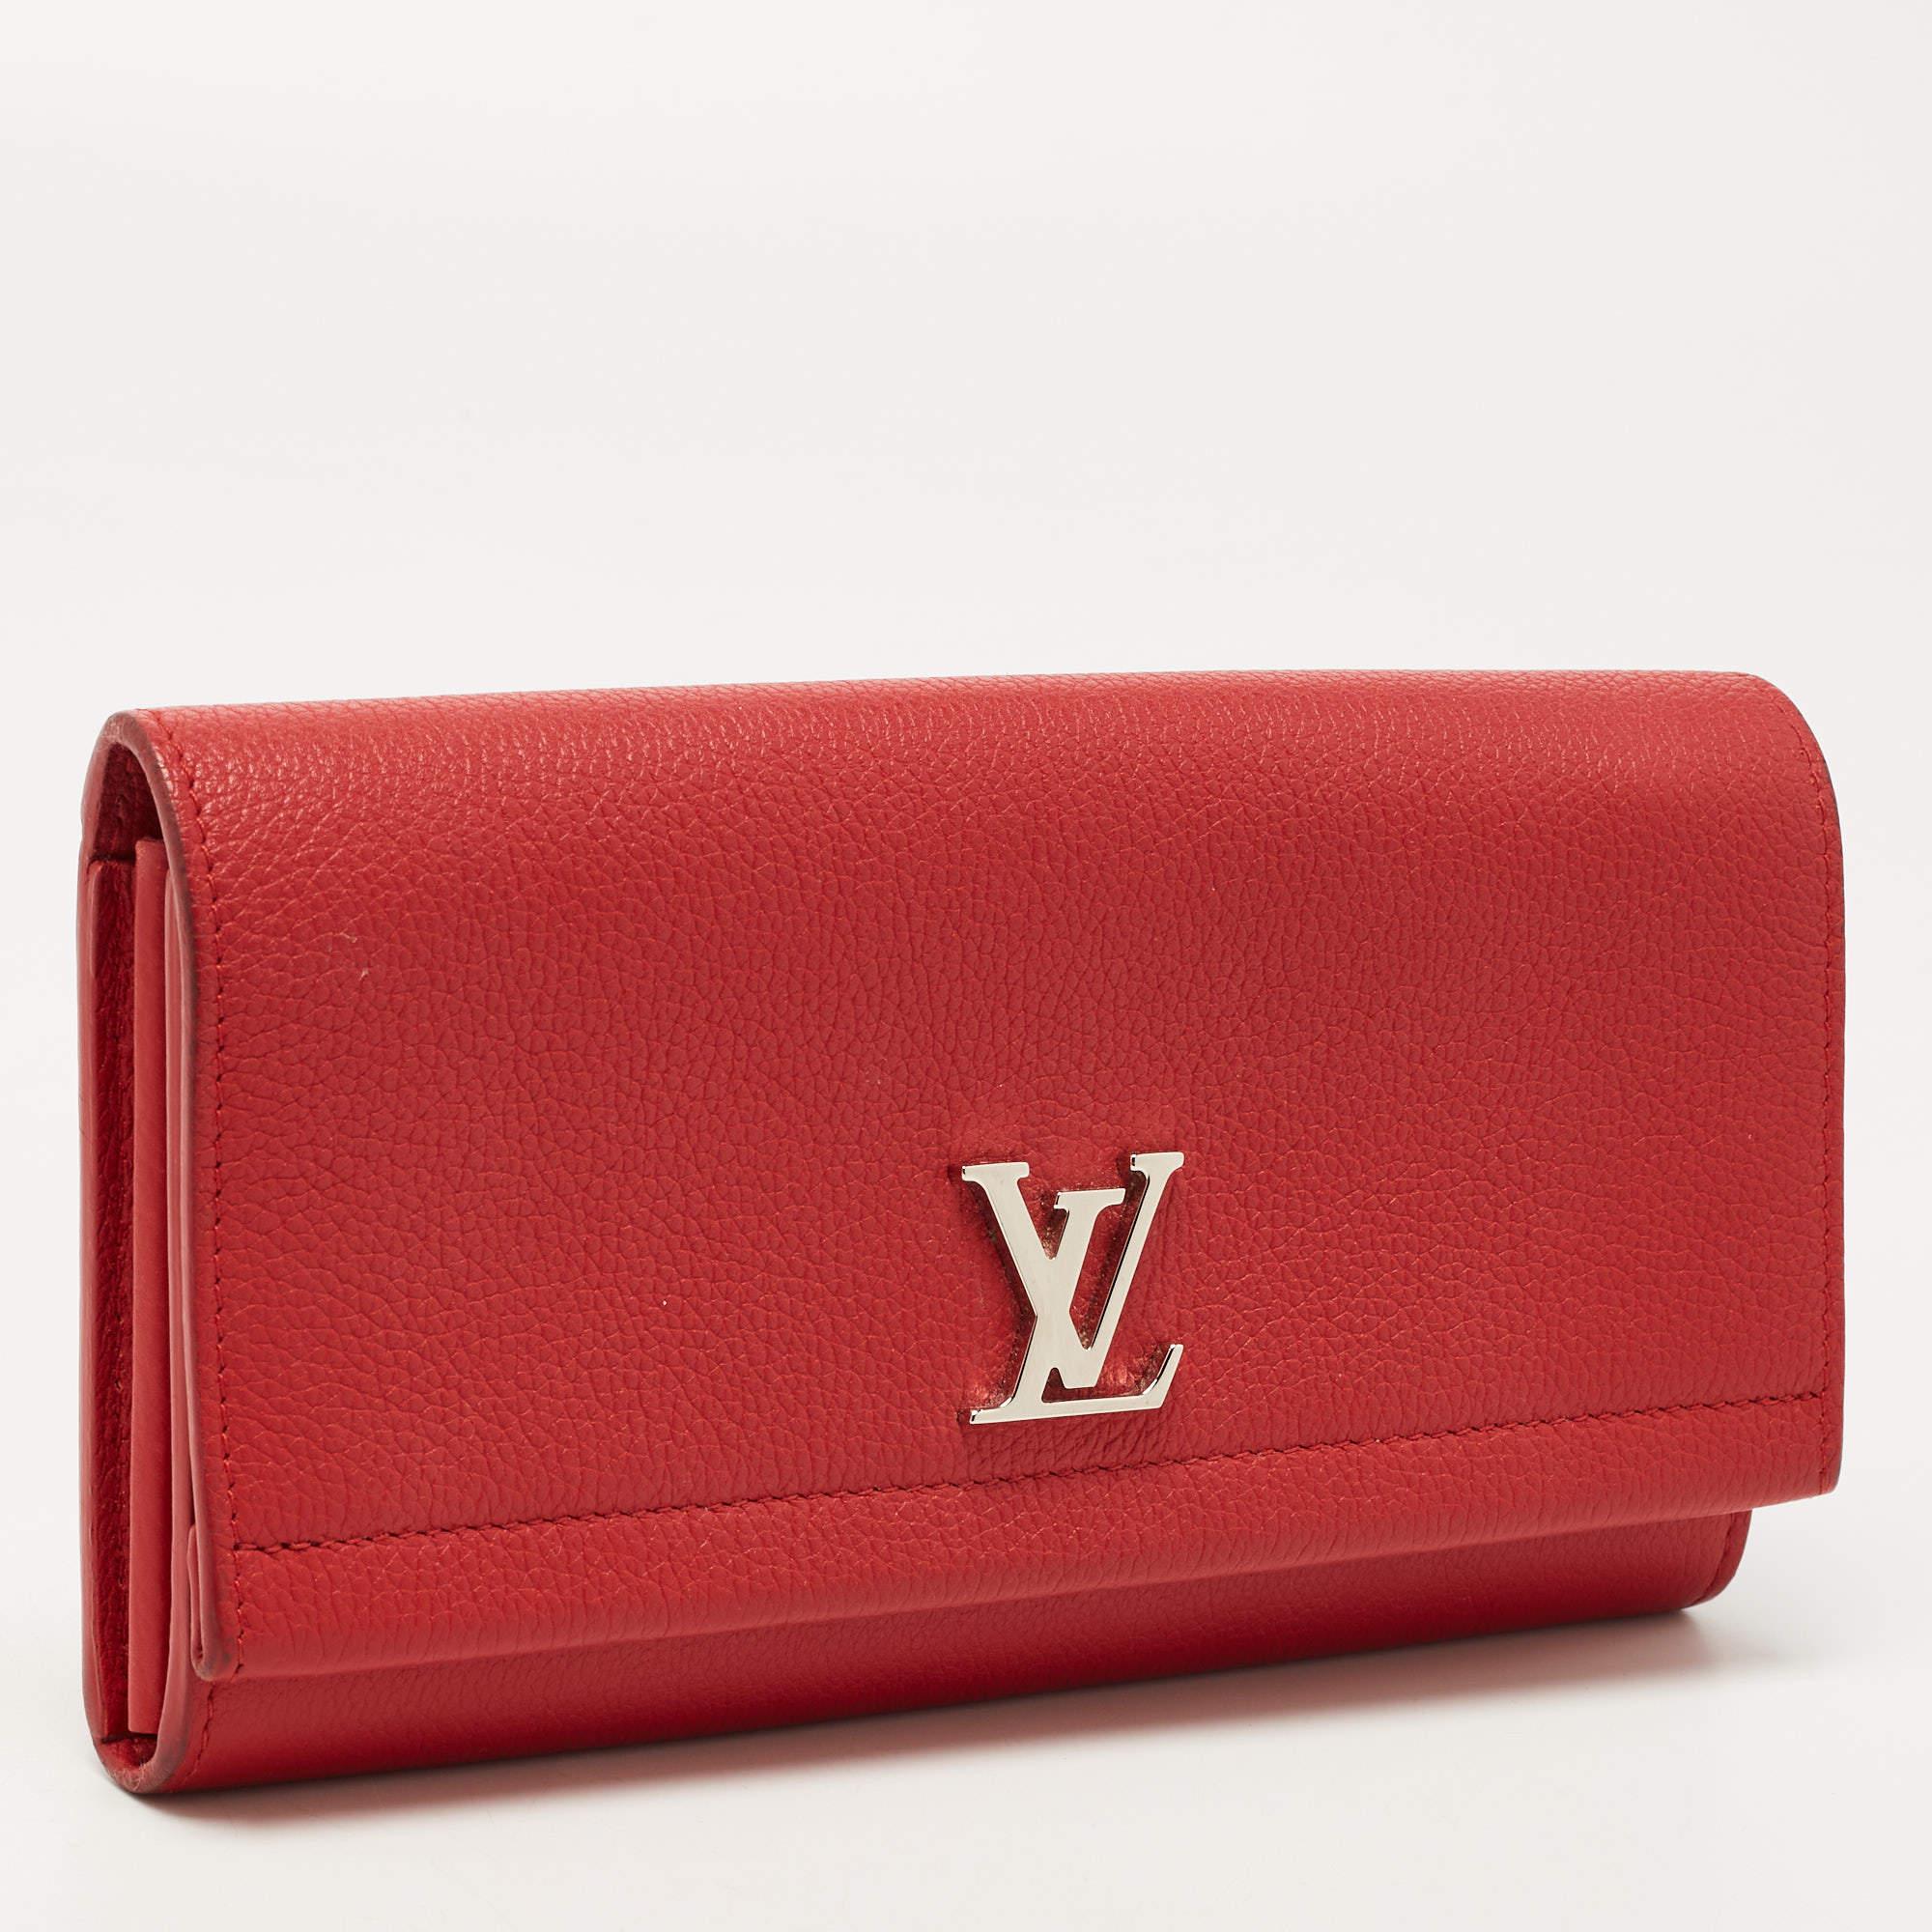 This luxurious Lock Me ll wallet by Louis Vuitton will be a joy to carry around. Made from red leather, the flap features the signature LV logo in silver-tone metal. It opens to reveal a compartmentalized interior.

Includes: Original Dustbag,